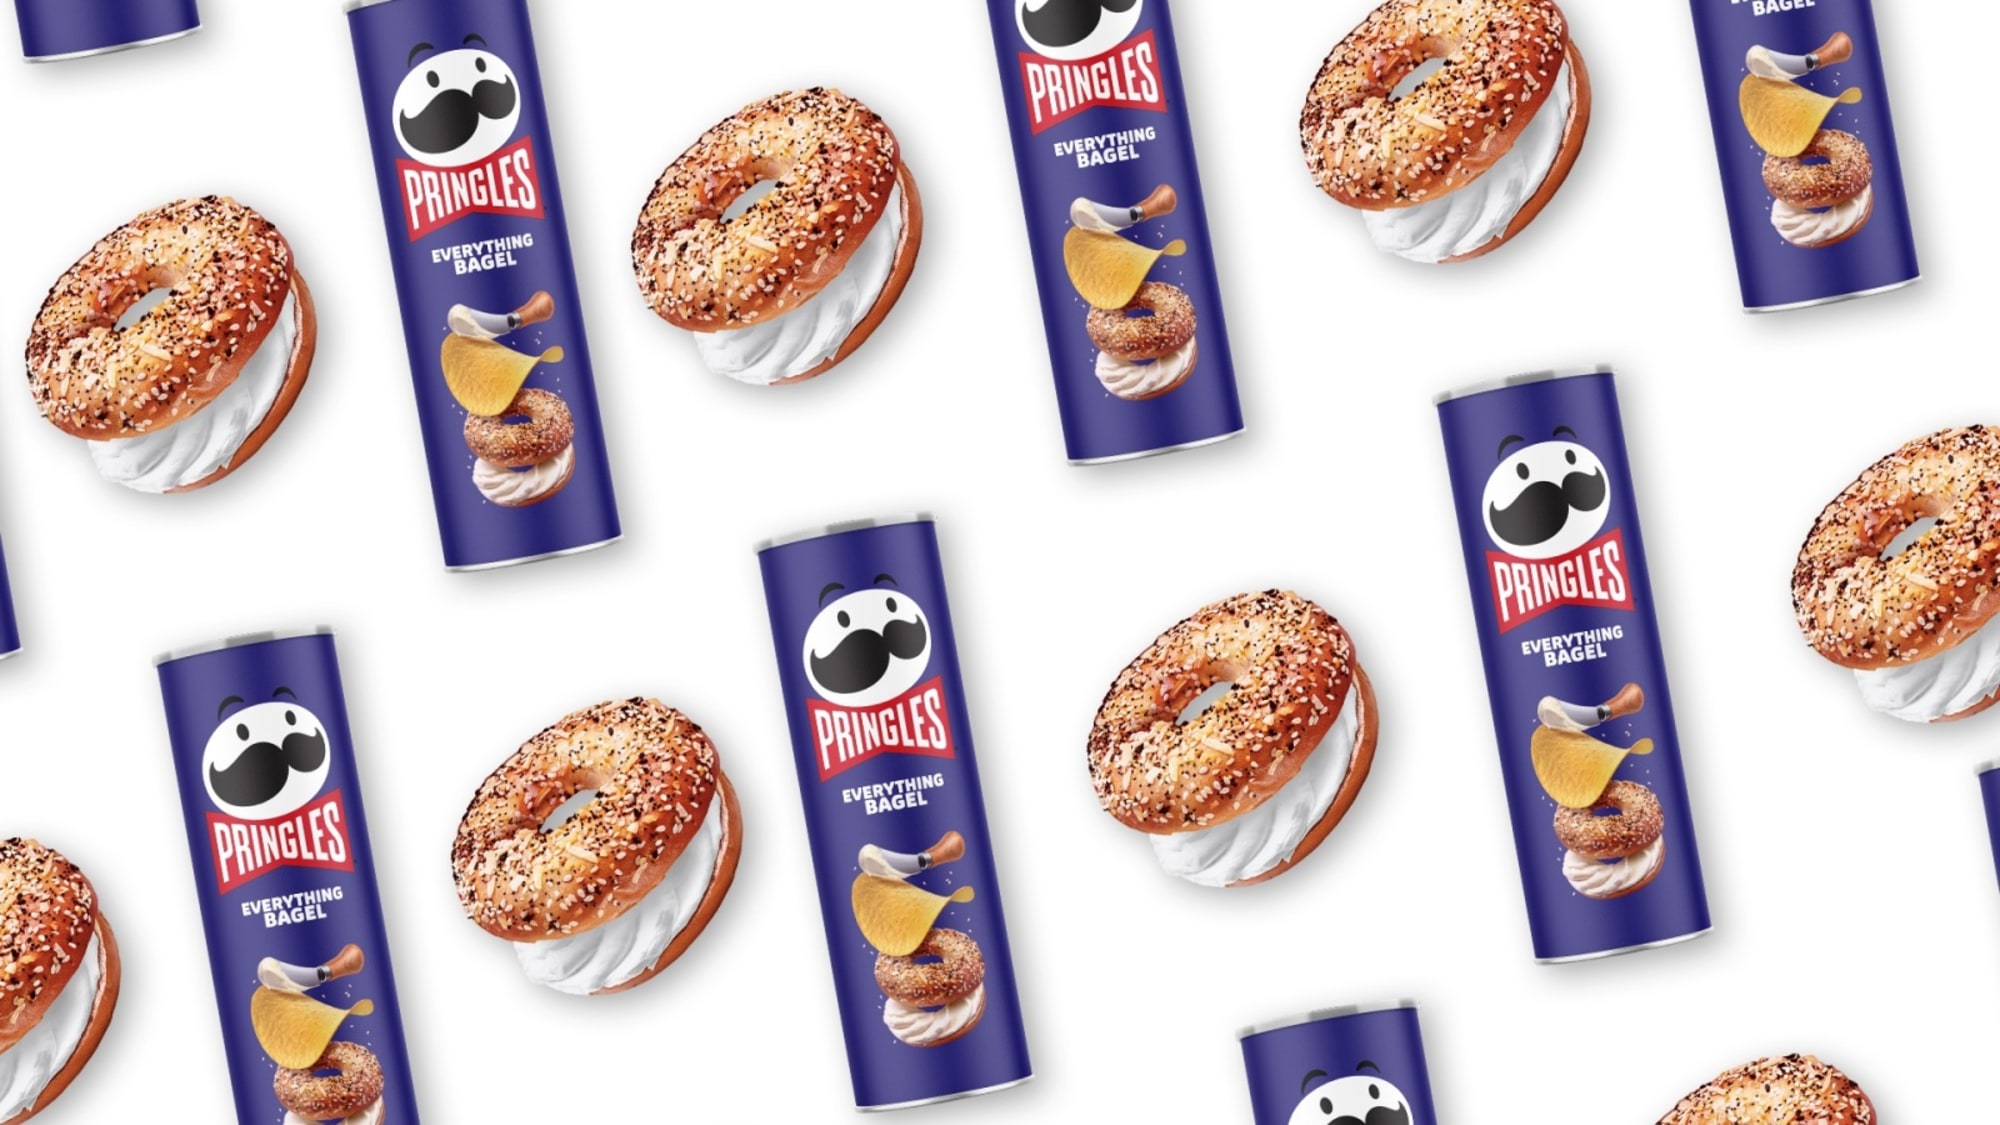 Pringles Everything Bagel flavor are a limited-edition snack